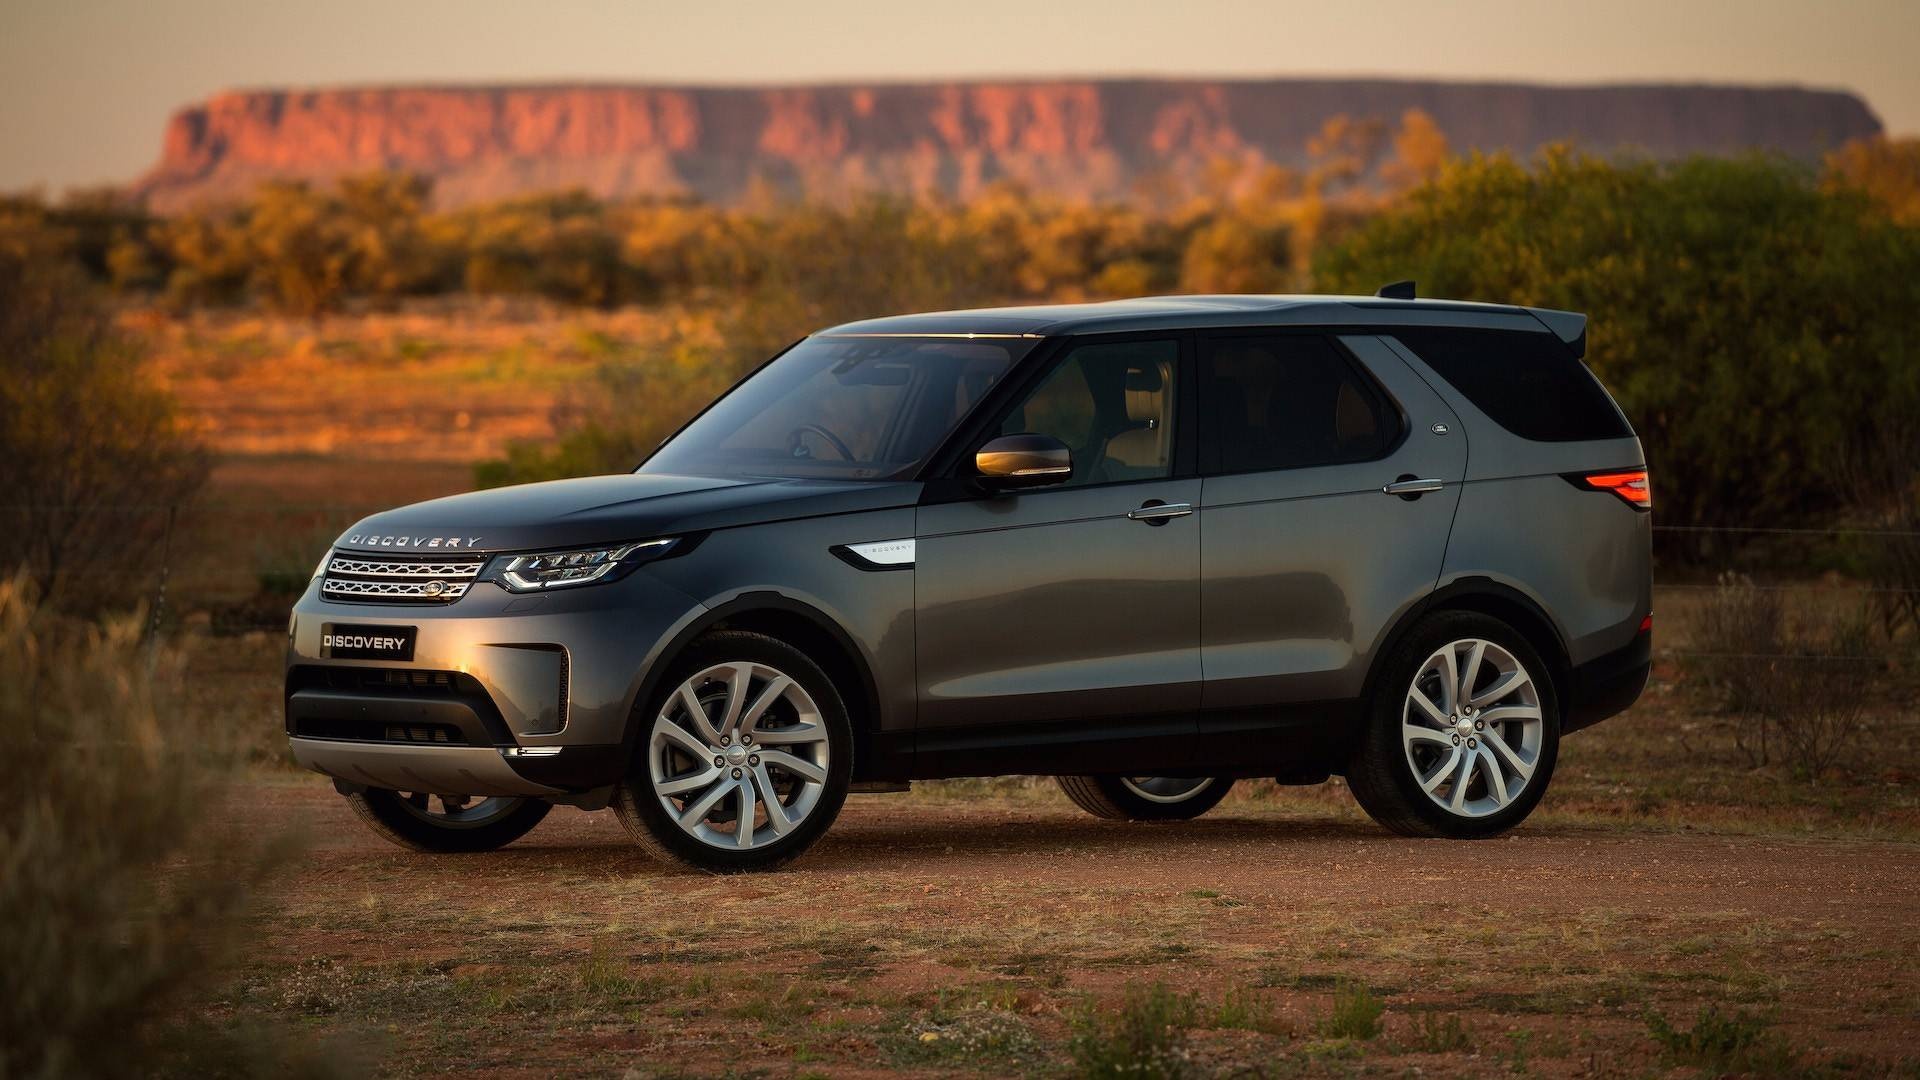 Land Rover Discovery, Production move, Slovakia, Jaguar Land Rover, 1920x1080 Full HD Desktop